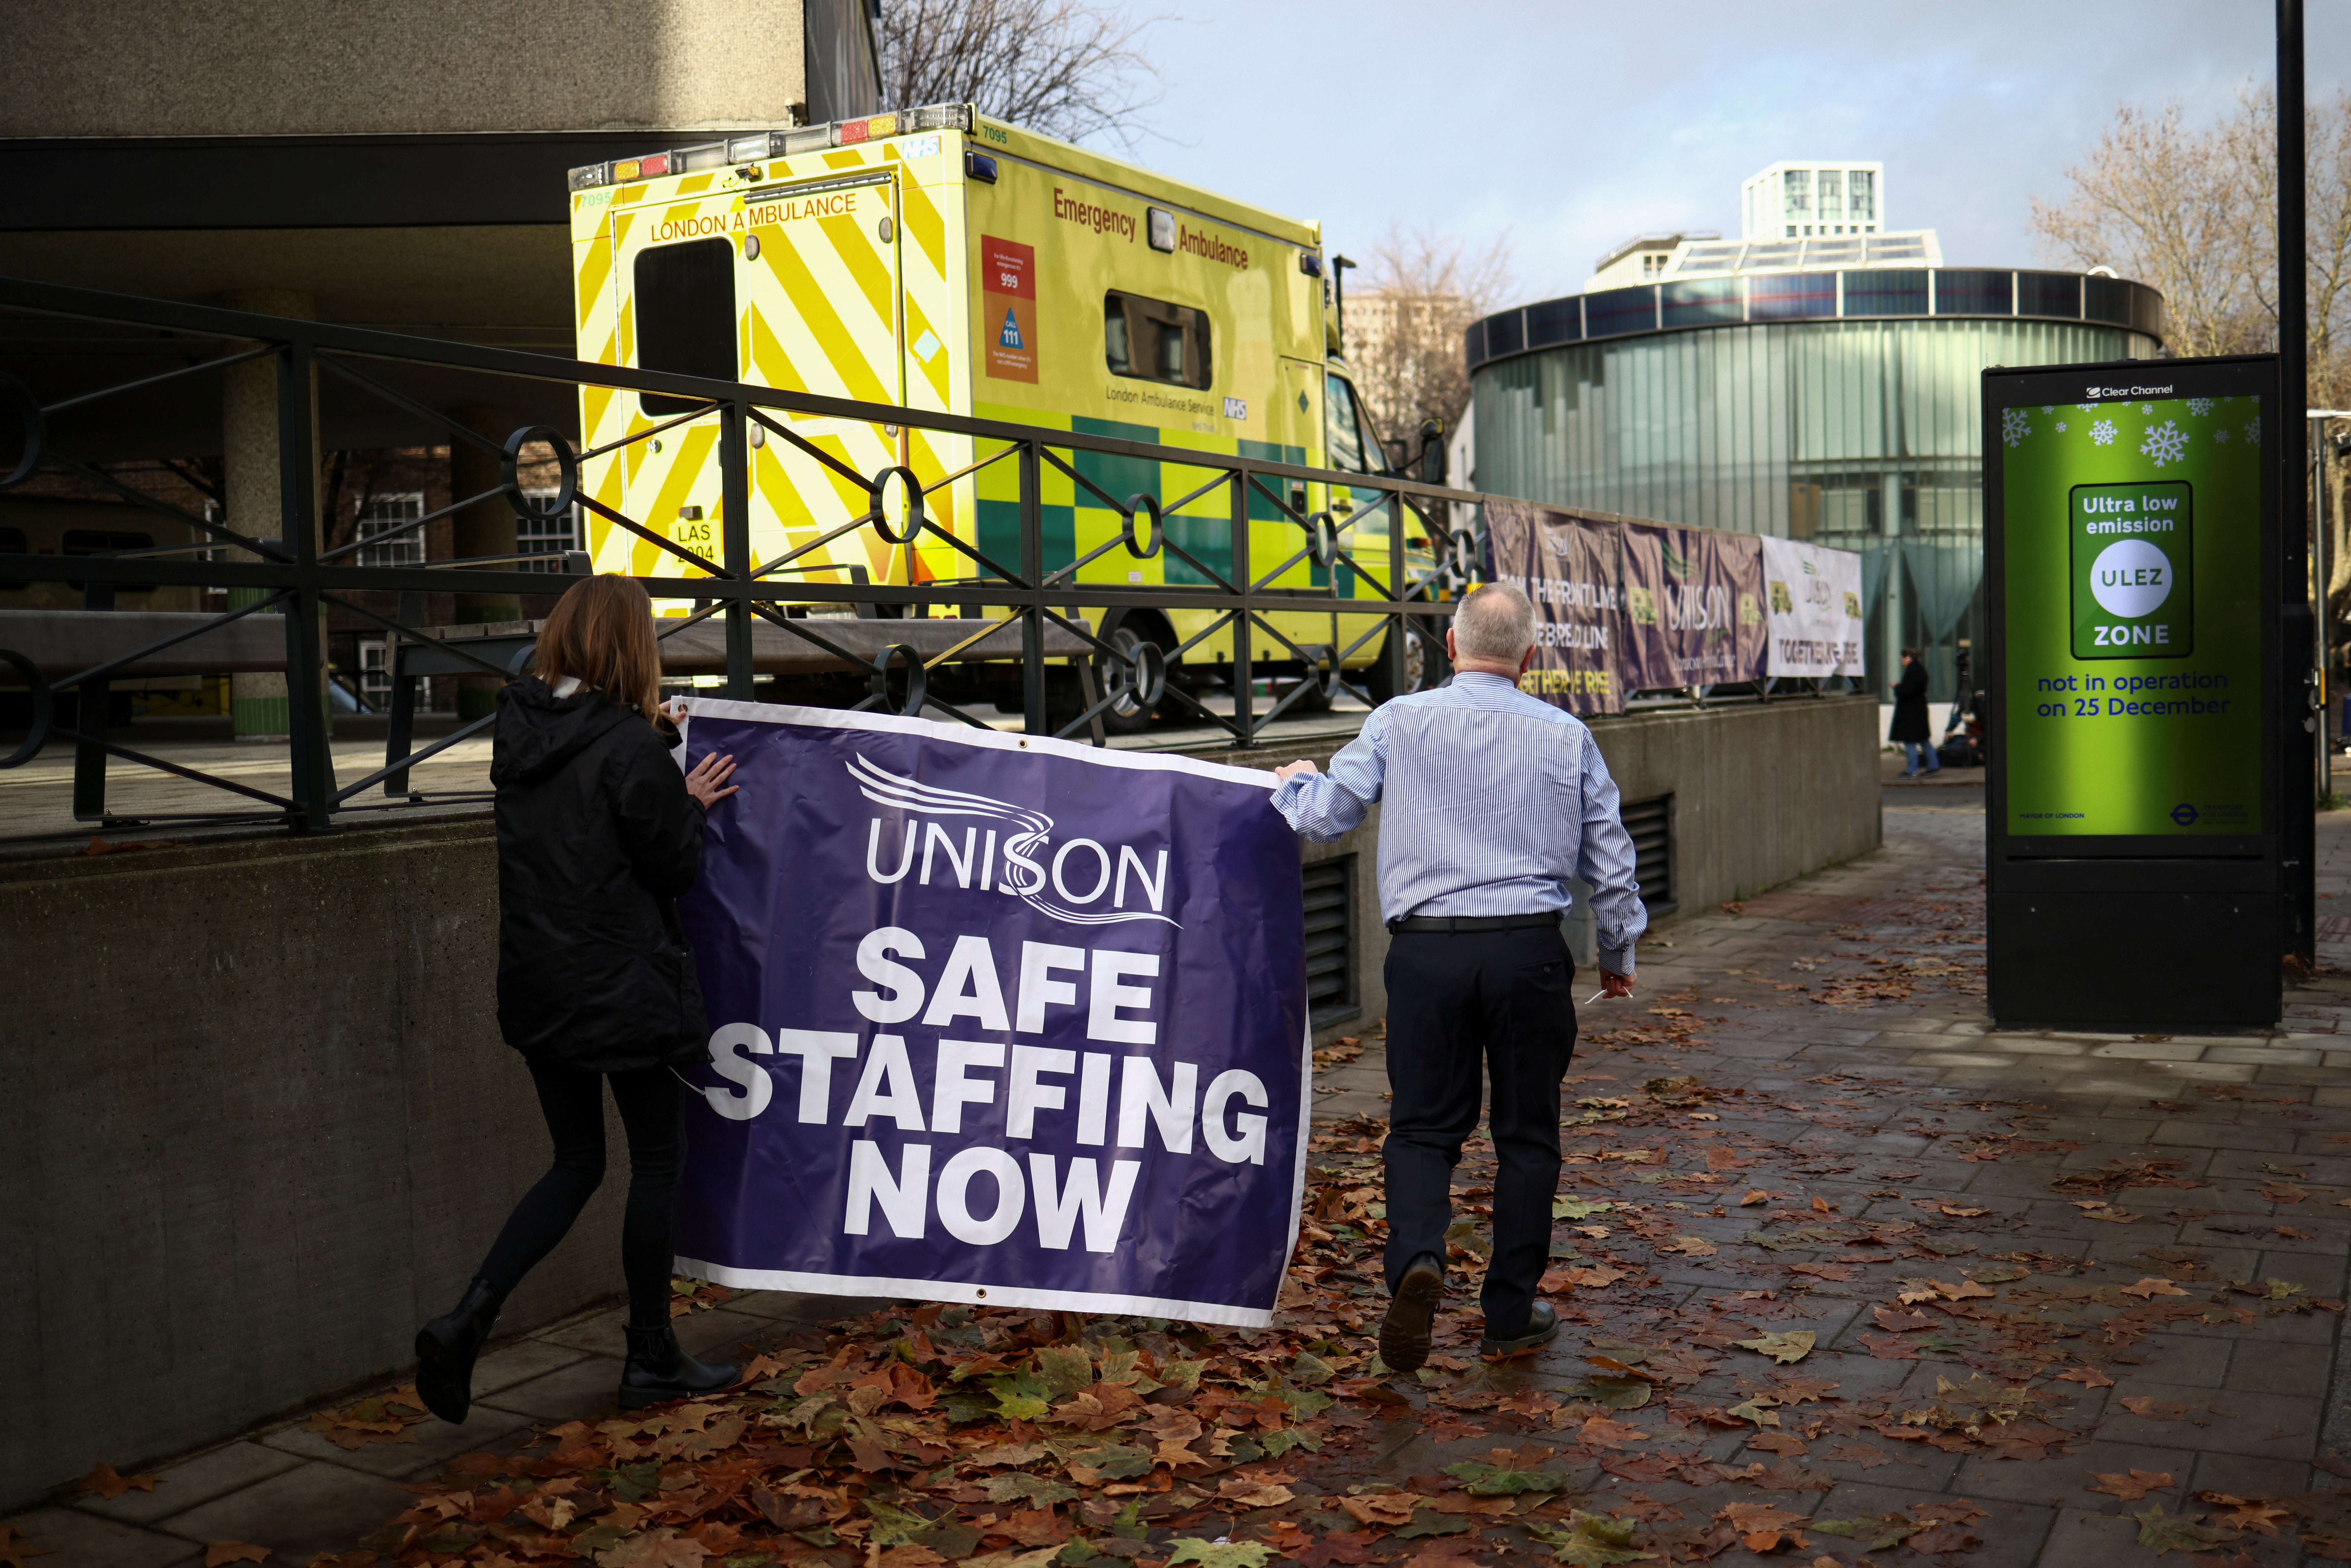 Public sector workers are striking over pay